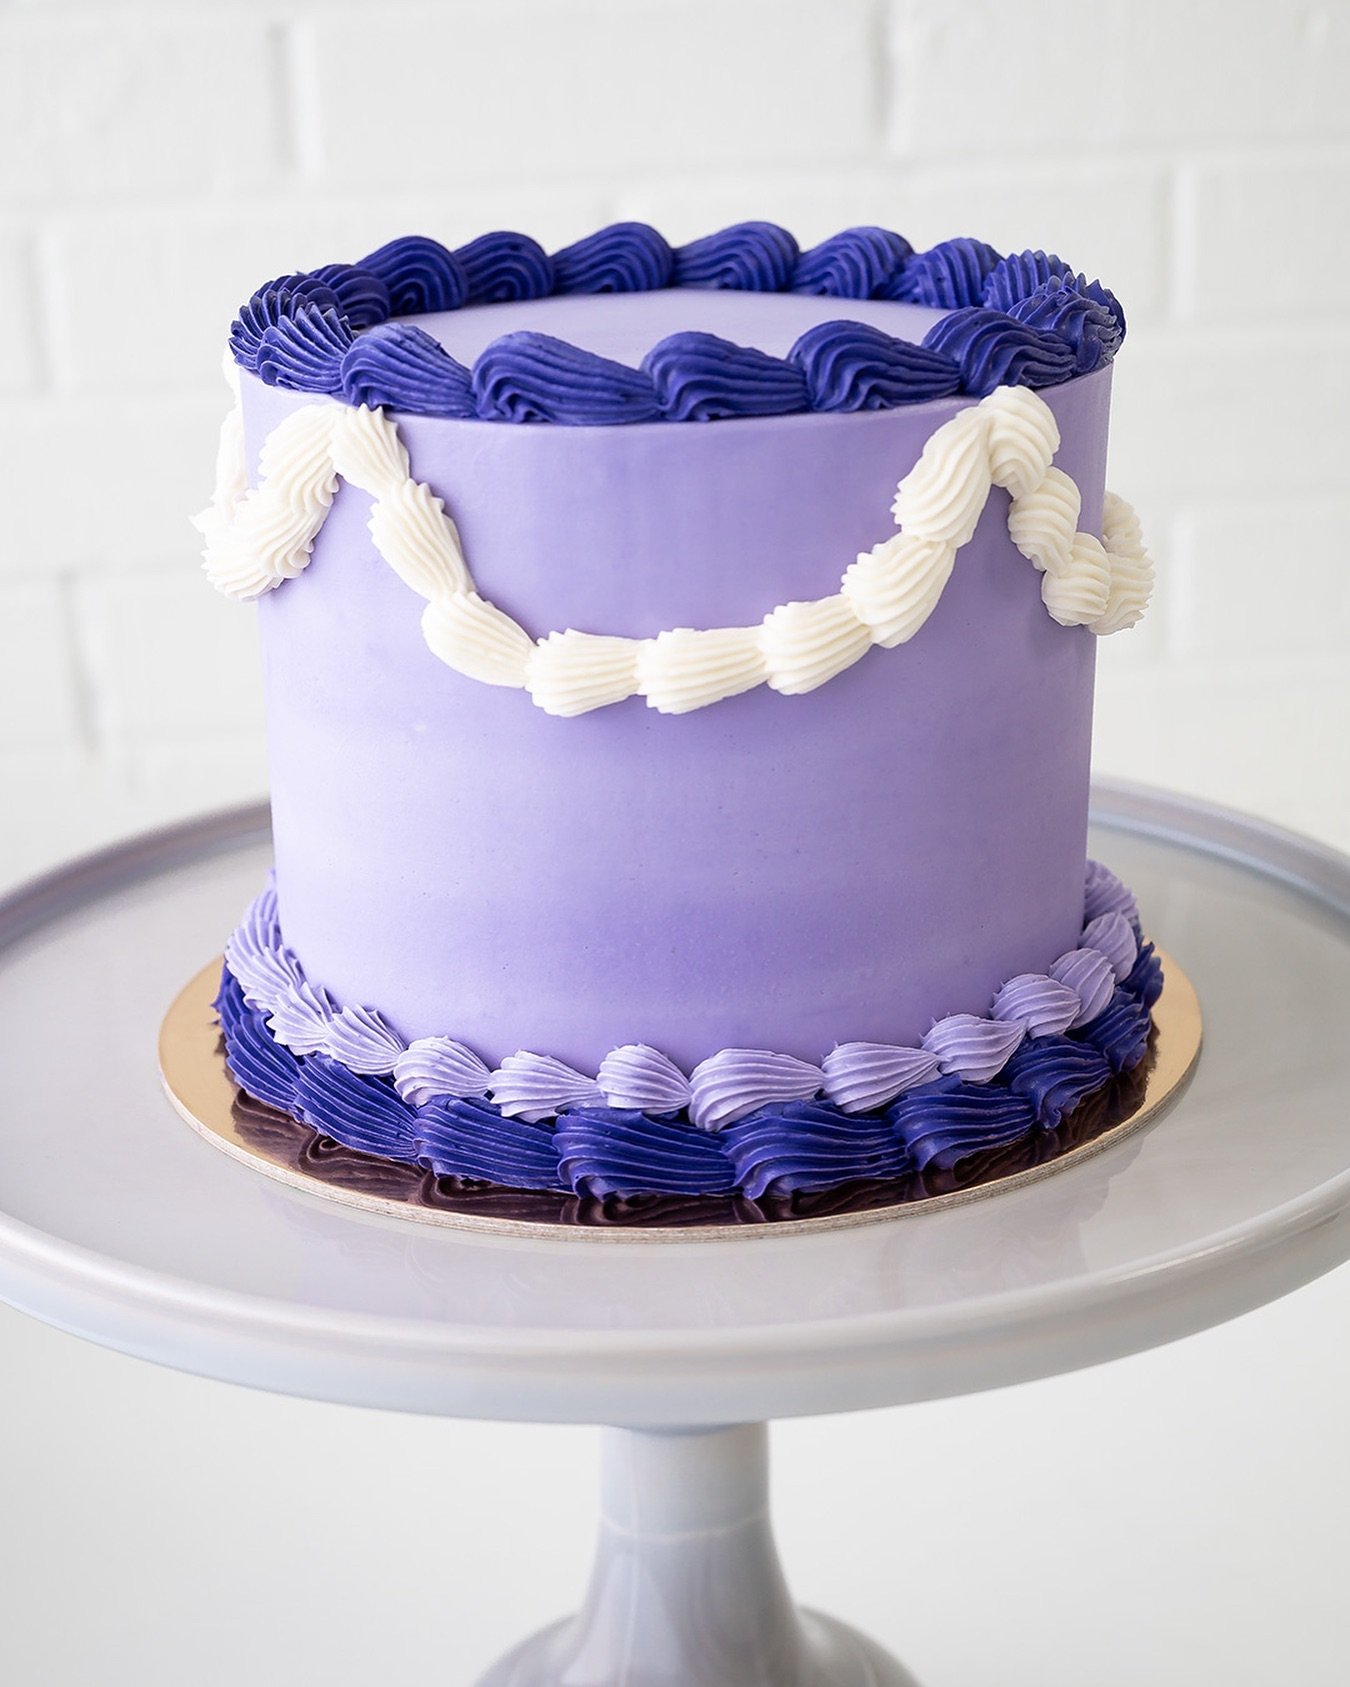 6&rdquo; Vintage Cake in Dark Purple Tonal and White 💜🤍🎂 Submit a preorder request for your next Made-to-Order Cake at the bio link.